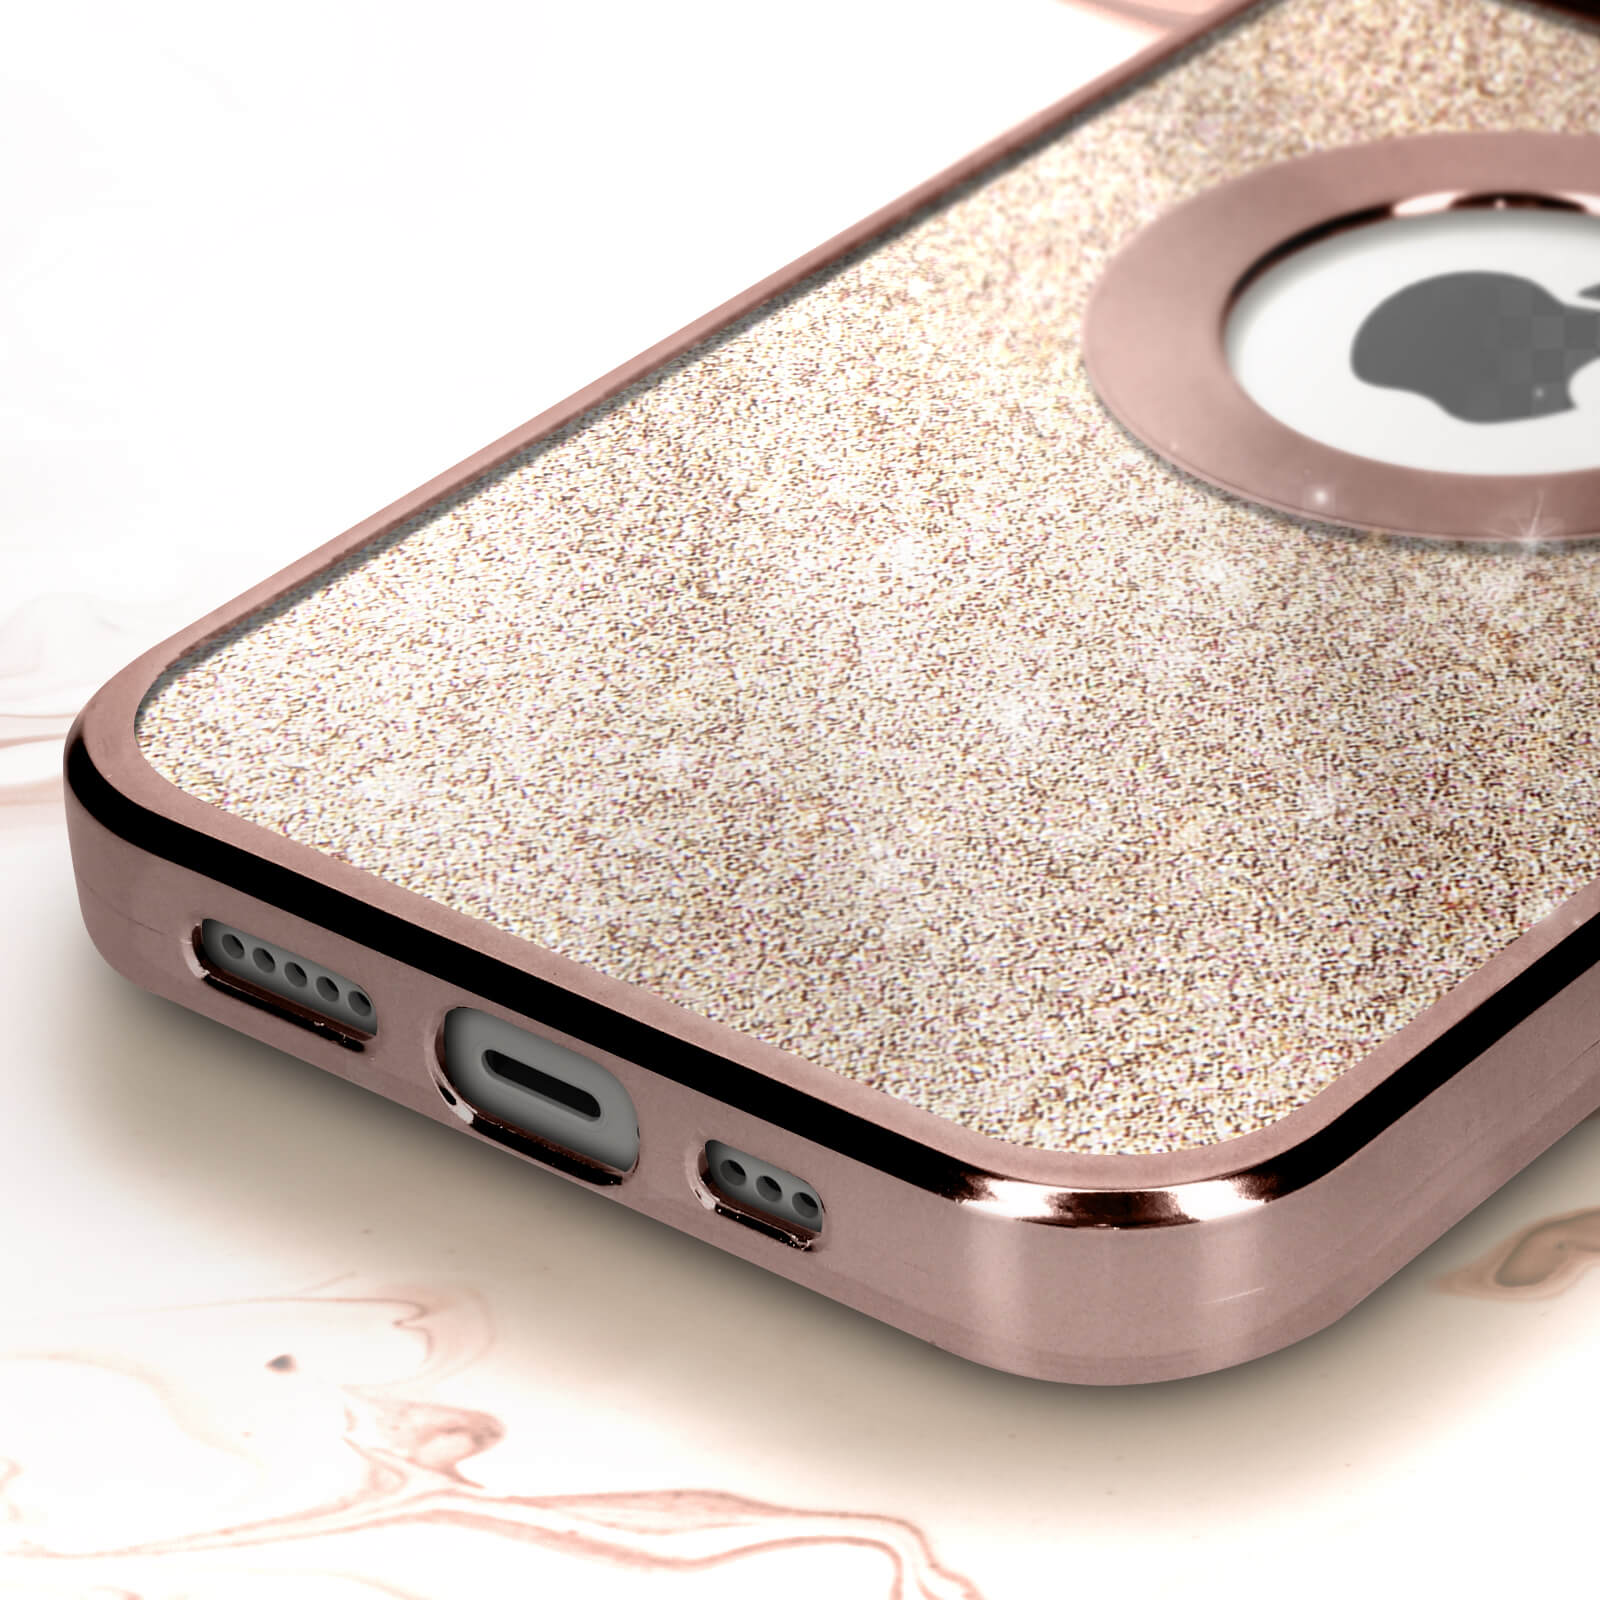 AVIZAR Protecam Spark Series, Backcover, iPhone Rosegold Max, 14 Pro Apple